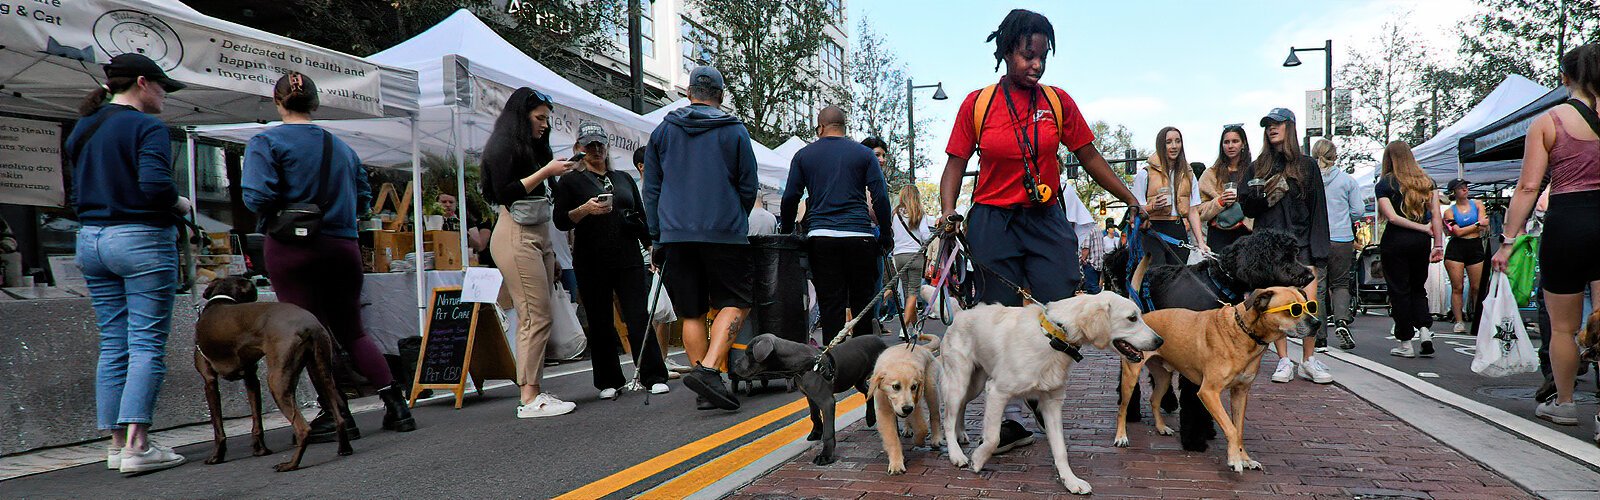 Dog handler Alexis has her hands full as she walks five curious puppies in training through The Market at Water Street Tampa.